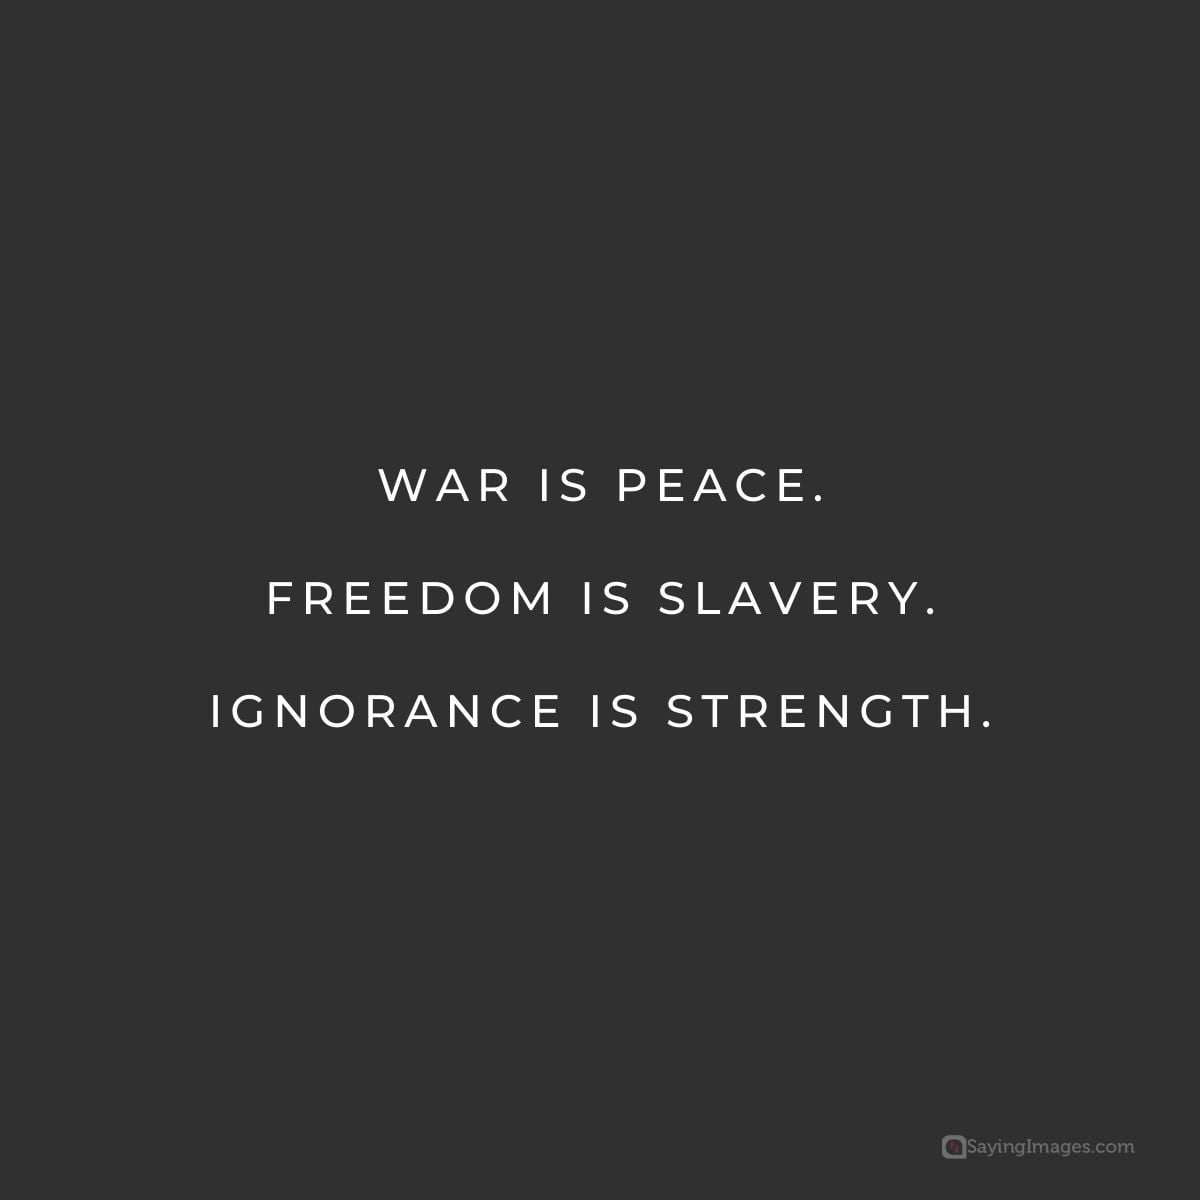 george orwell war quote